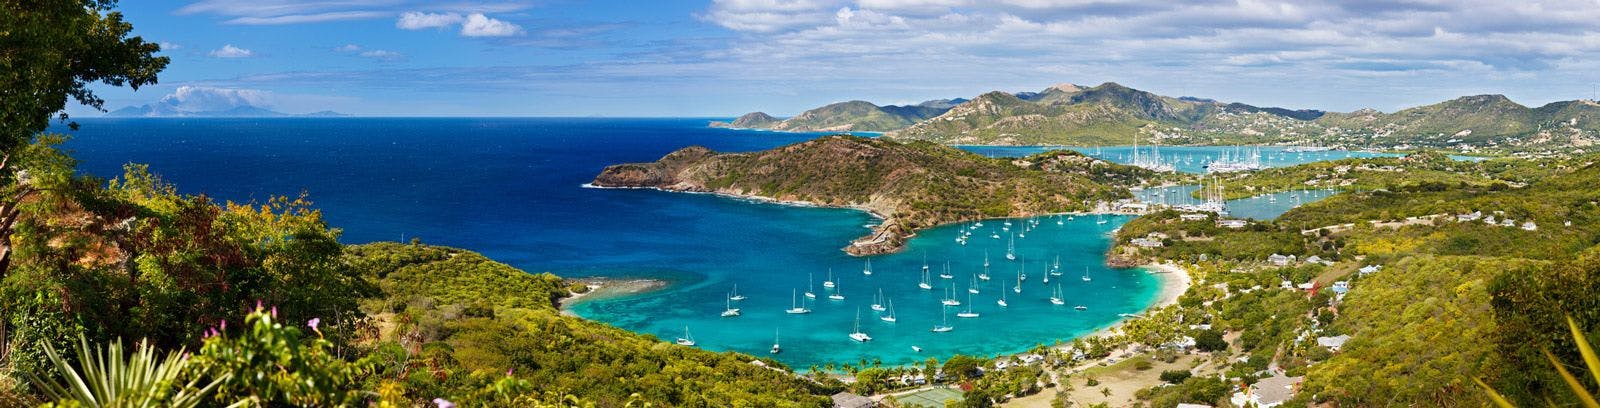 English Harbor in Antigua with sailboats in the natural harbor